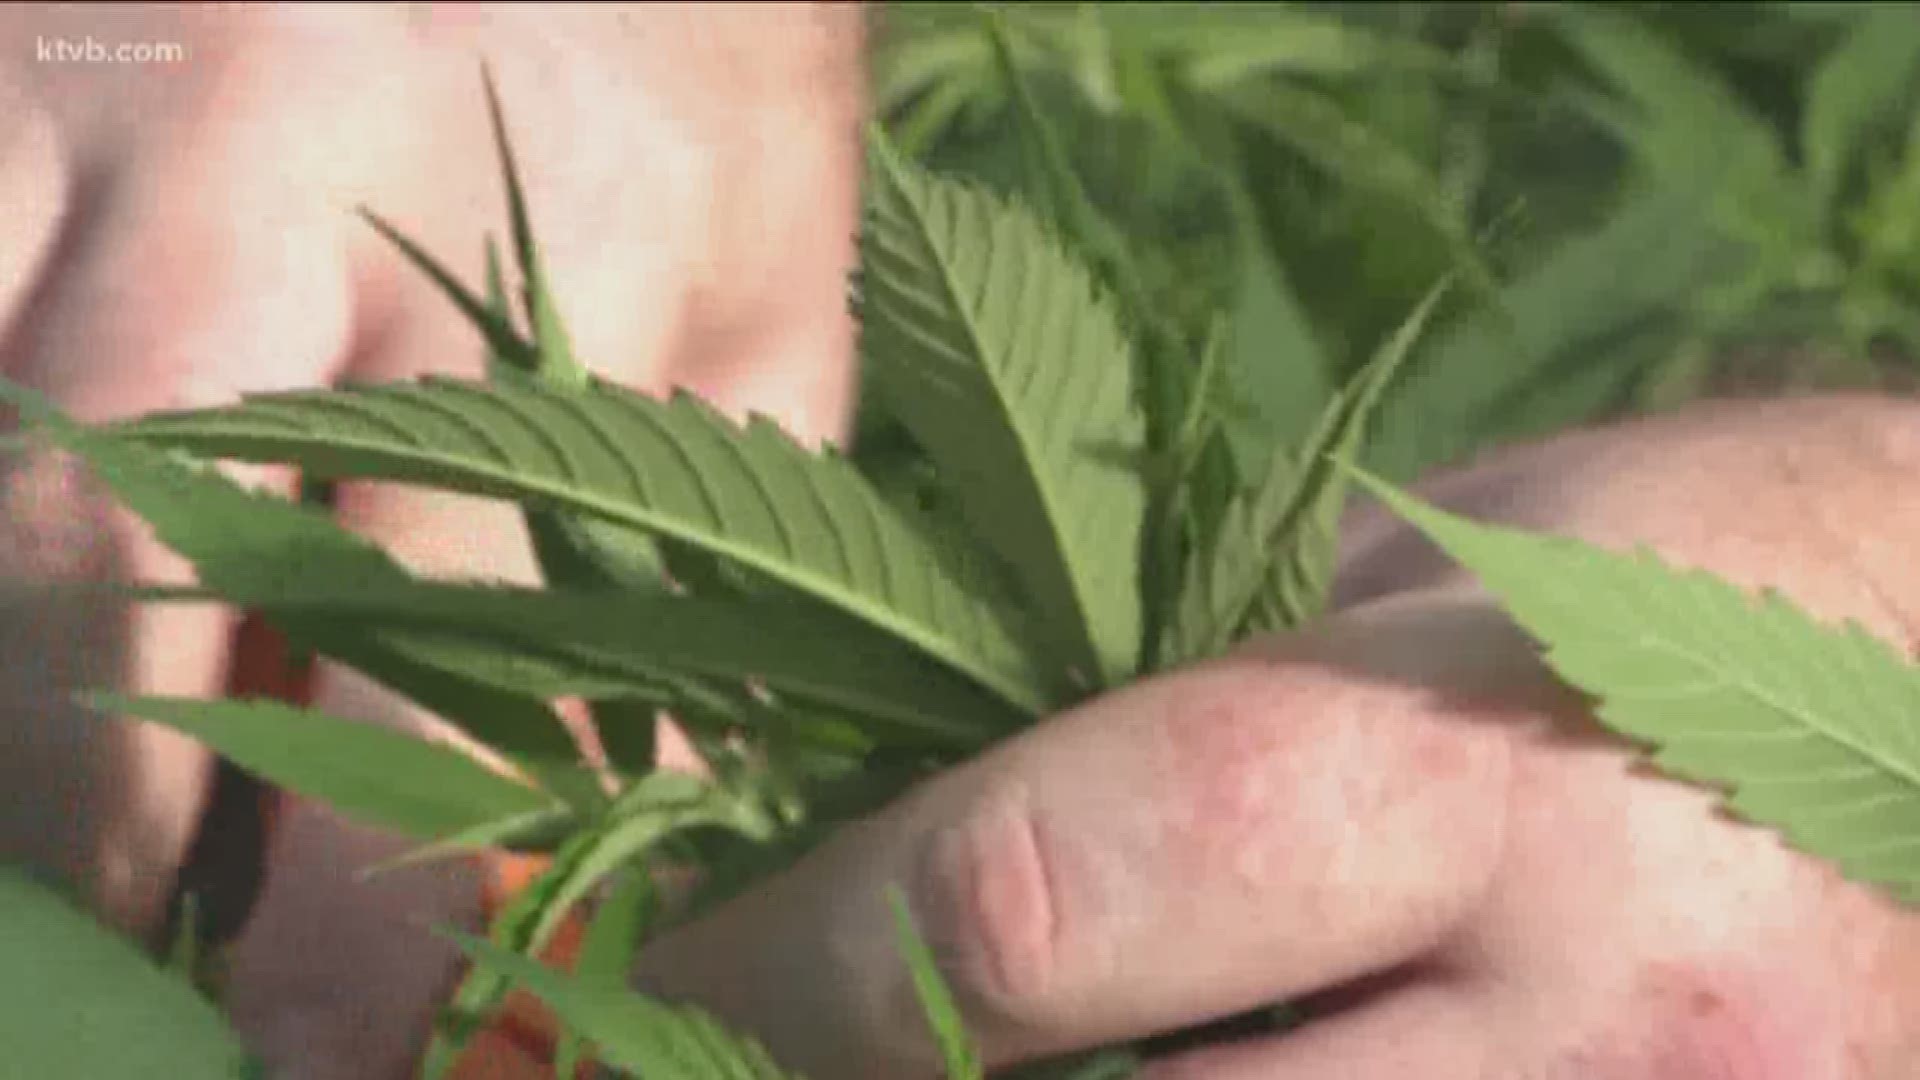 A recent pot bust here has sparked a lot of confusion when it comes to our laws regarding hemp and marijuana. That confusion is magnified by the fact that federal law on the topic conflicts with Idaho laws. KTVB's Shirah Matsuzawa sets out to clear up the confusion.